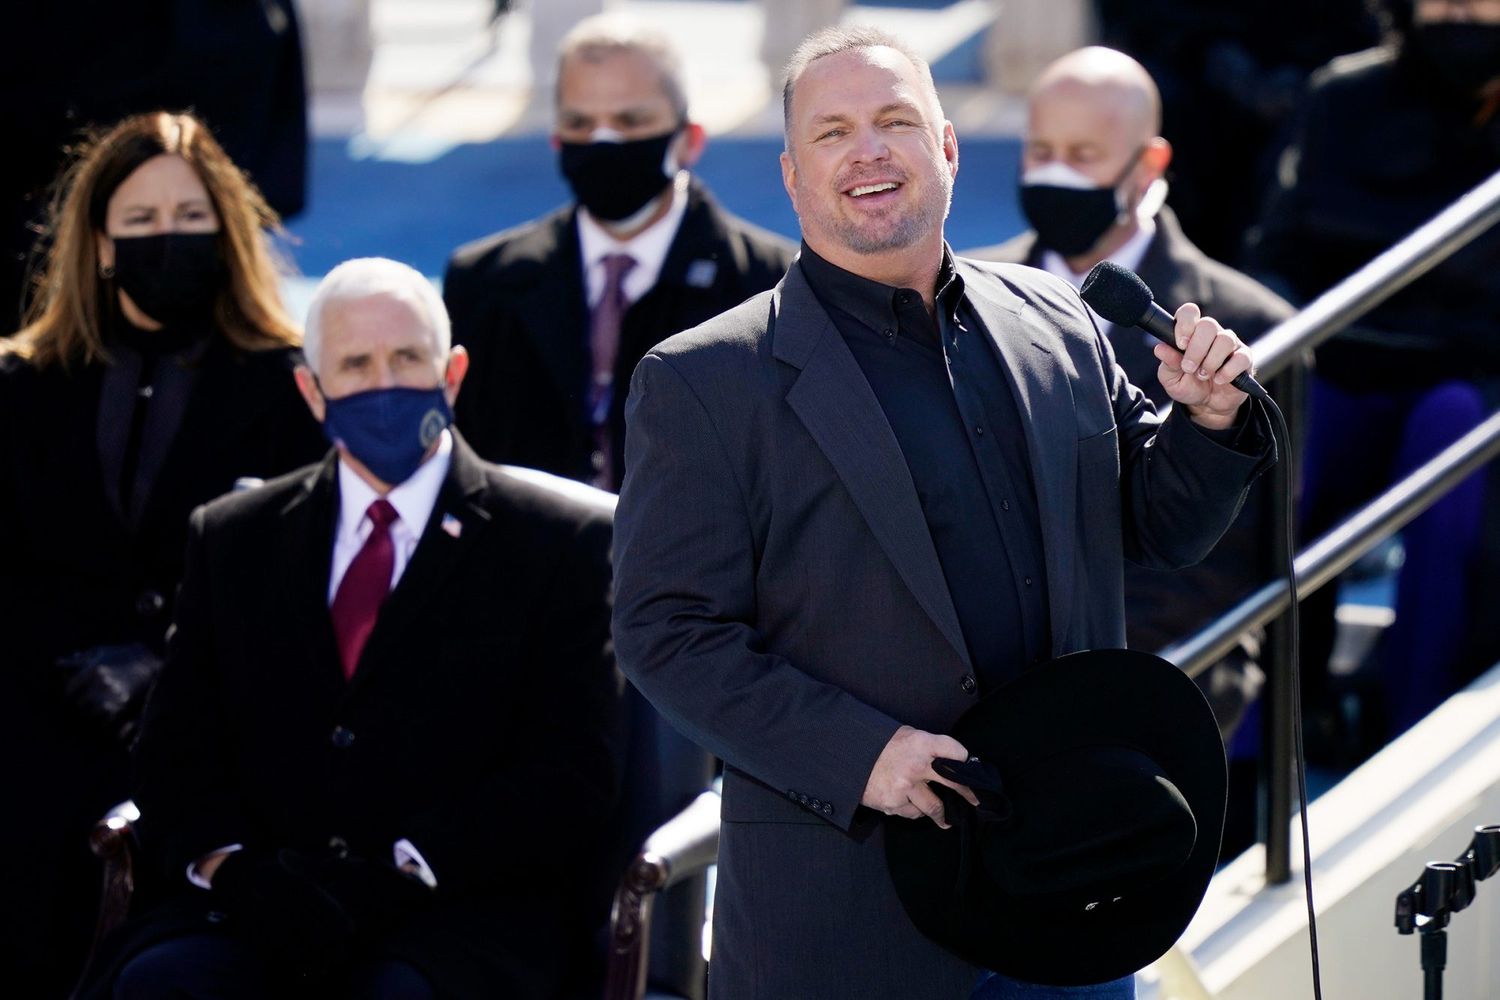 Garth Brooks performs at the inauguration of U.S. President Joe Biden on the West Front of the U.S. Capitol on January 20, 2021